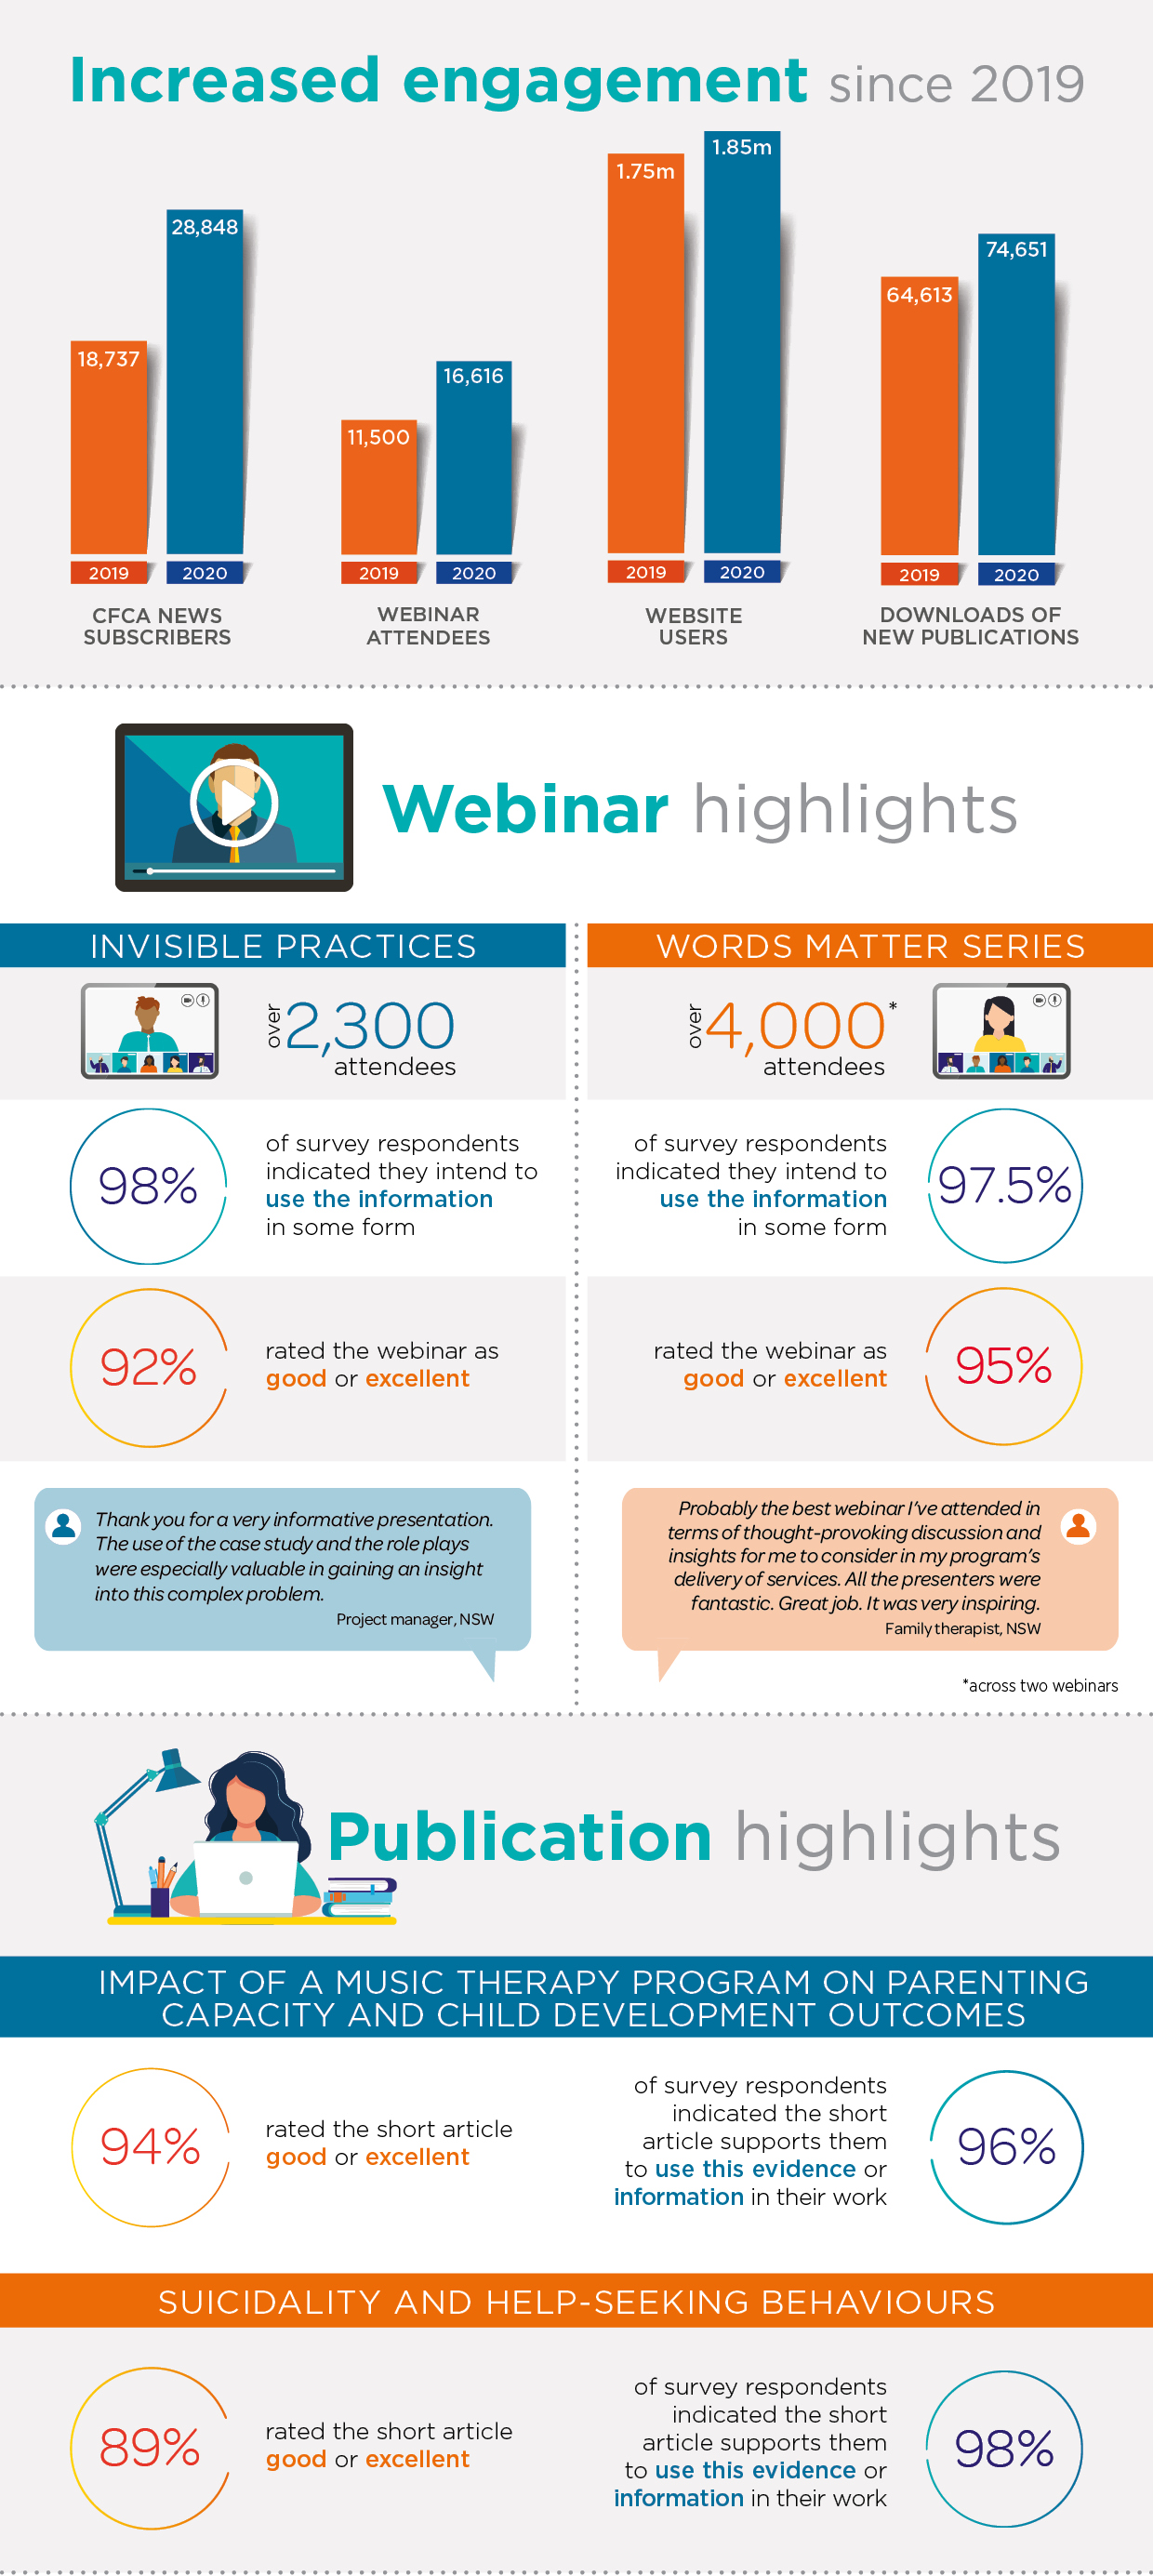 Increased engagement since 2019: CFCA news subscribers - 18,737 (2019), 28,848 (2020); Webinar attendees - 11,500 (2019), 16,616 (2020); Website users - 1.75m (2019), 1.85m (2020); Downloads of new publications - 64,613 (2019), 74,651 (2020); Webinar highlights (*across two webinars) - Invisible practices-Over 2,300 attendees, 98% of survey respondents indicated they intend to use the information in some form, 92% rated the webinar as good or excellent, "Thank you for a very informative presentation. The use of the case study and the role plays were especially valuable in gaining an insight into this complex problem (Project manager, NSW)"; Words matter series-Over 4,000 attendees, 97.5% of survey respondents indicated they intend to use the information in some form, 95% rated the webinar as good or excellent, "Probably the best webinar I've attended in terms of thought-provoking discussion and insights for me to consider in my program's delivery of services. All the presenters were fantastic. Great job. It was very inspiring. (Family therapist, NSW)". Publication highlights - Impact of a music therapy program on parenting capacity and child development outcomes - 94% rated the short article good or excellent, 96% of survey respondents indicated the short article supports them to use this evidence or information in their work; Suicidality and help-seeking behaviours - 89% rated the short article good or excellent, 98% of survey respondents indicated the short article supports them to use this evidence or information in their work.